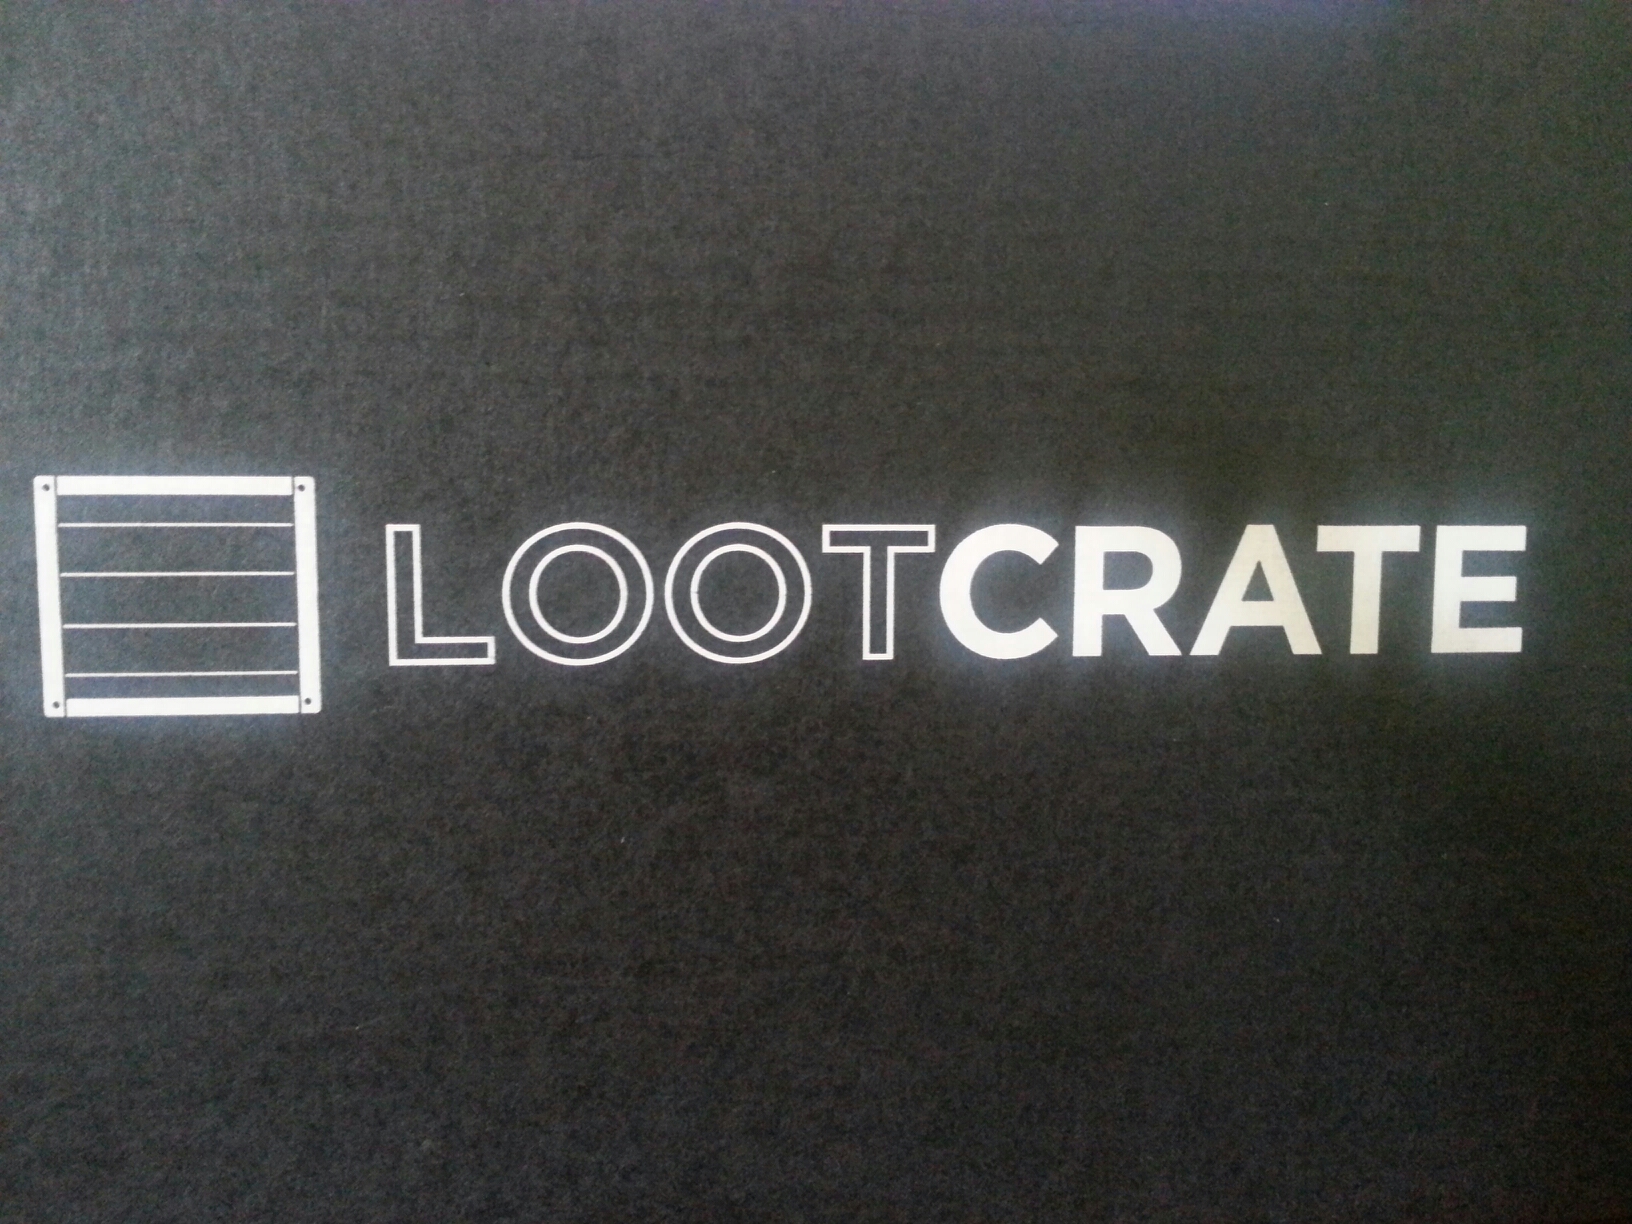 Loot crate review and unboxing for september 2014: galactic theme